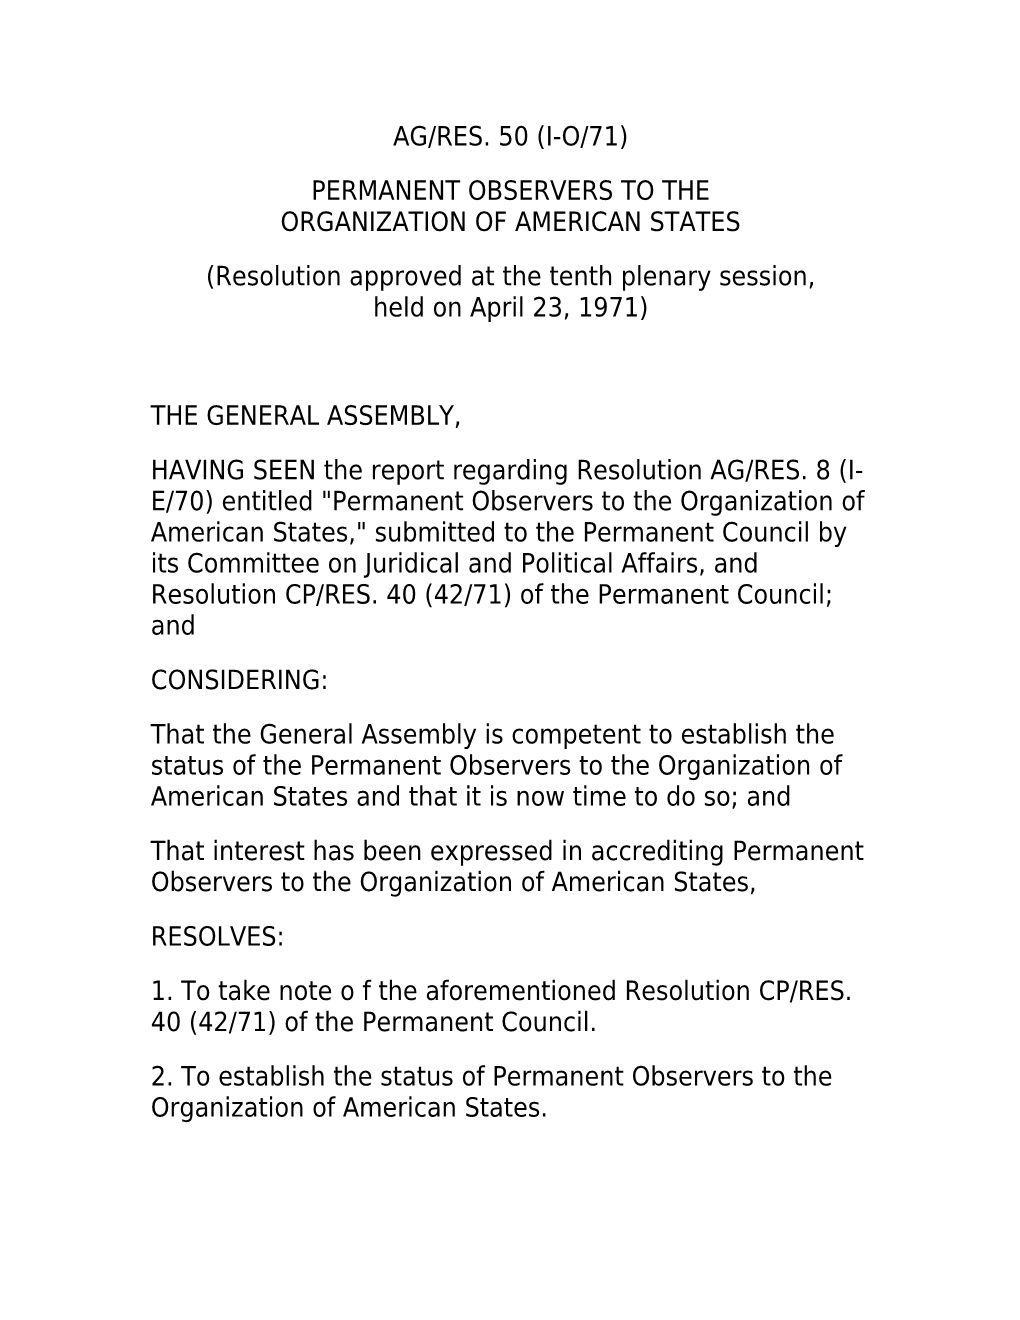 Permanent Observers to the Organization of American States